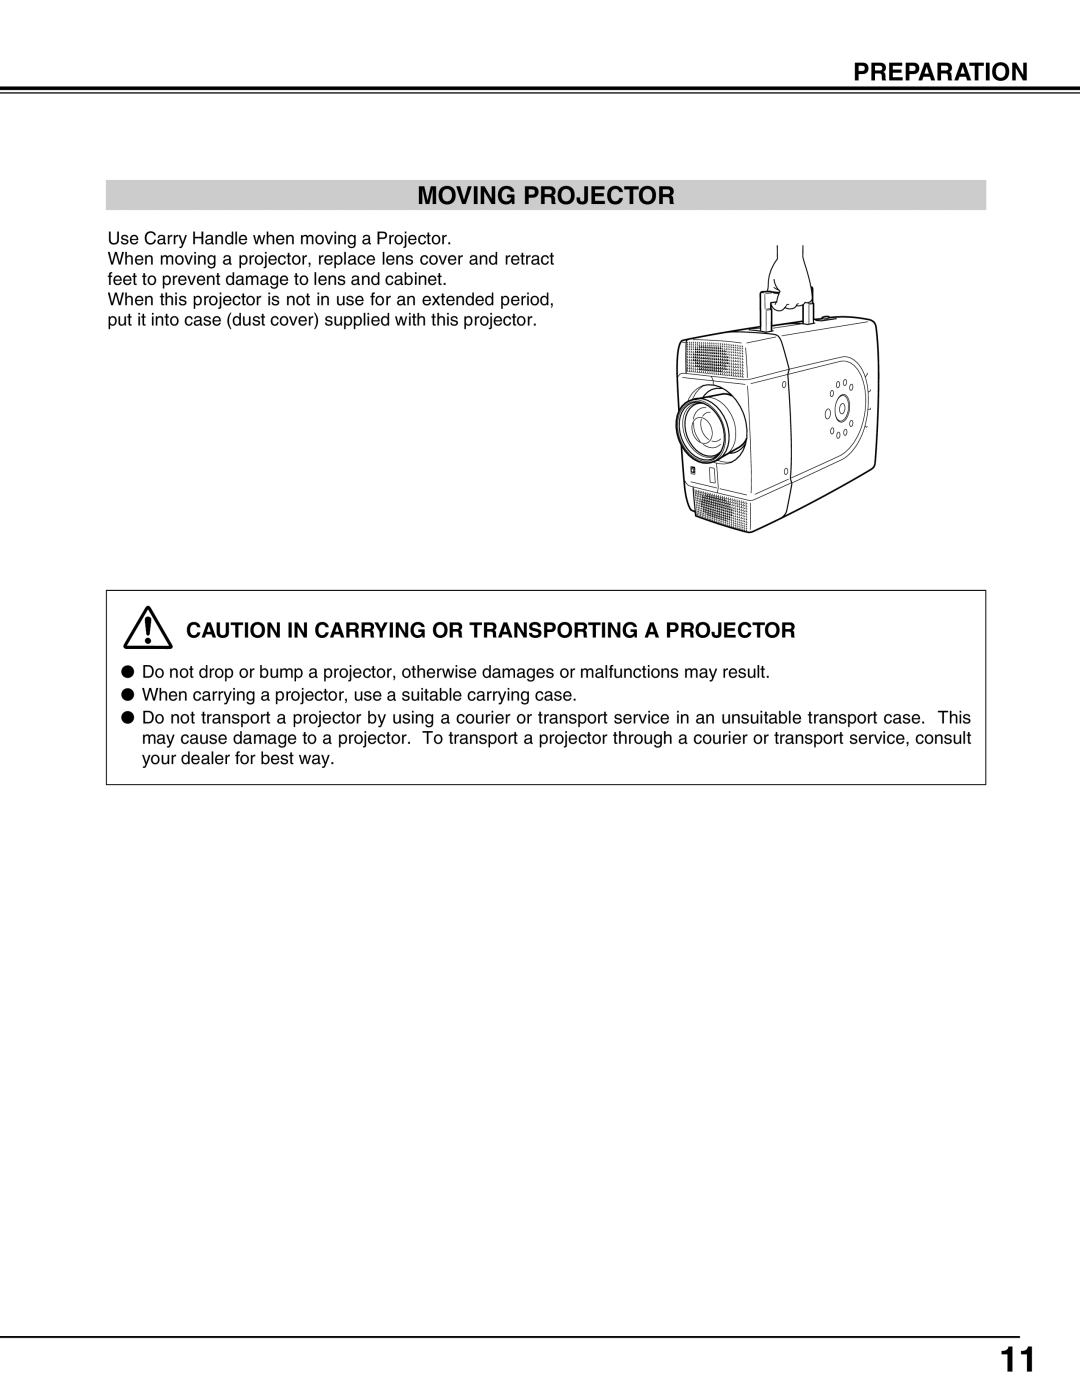 Eiki LC-X70 instruction manual Preparation Moving Projector, Caution In Carrying Or Transporting A Projector 